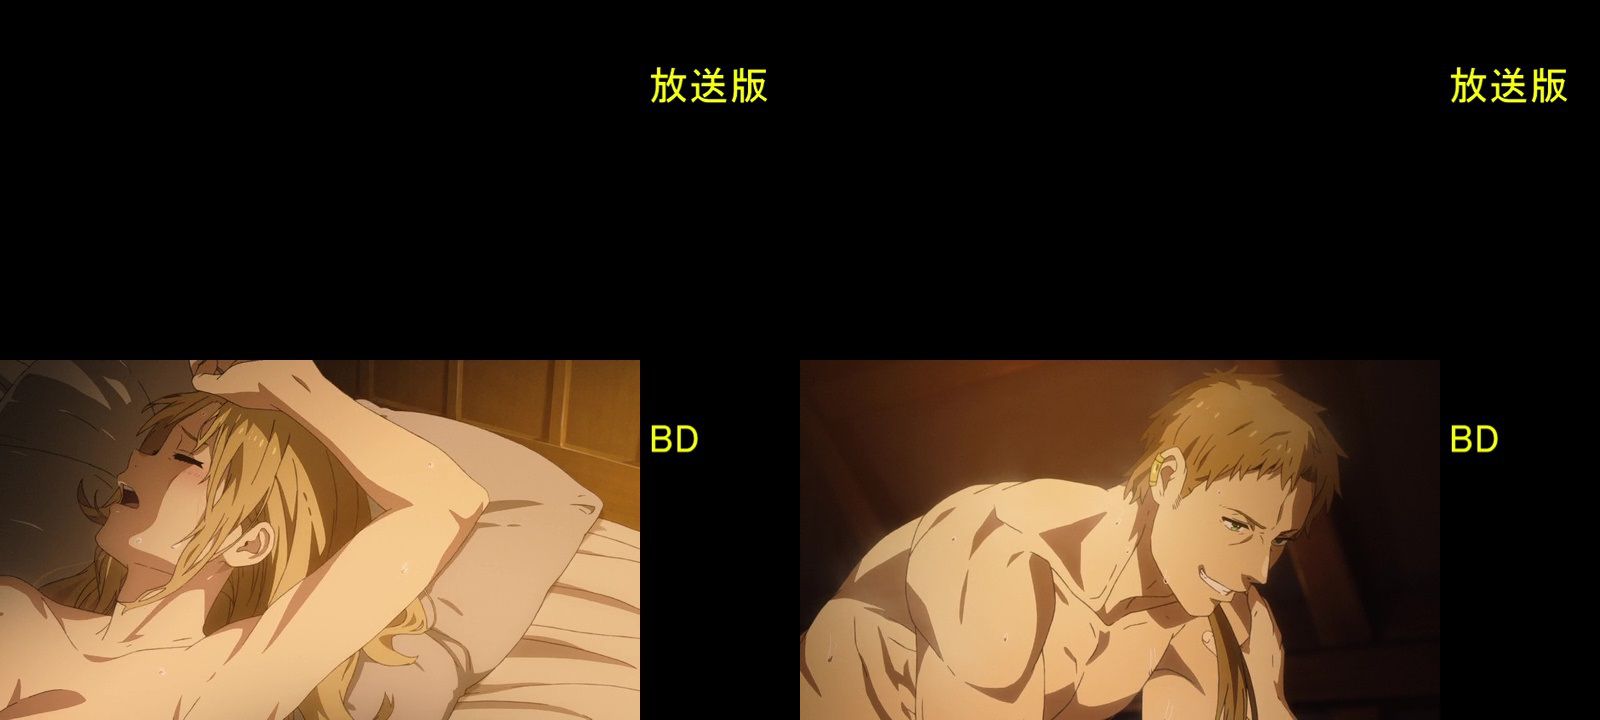 The anime "Unemployed Reincarnation" BD depicts a new sex scene that was darkened by the terrestrial wave! 3